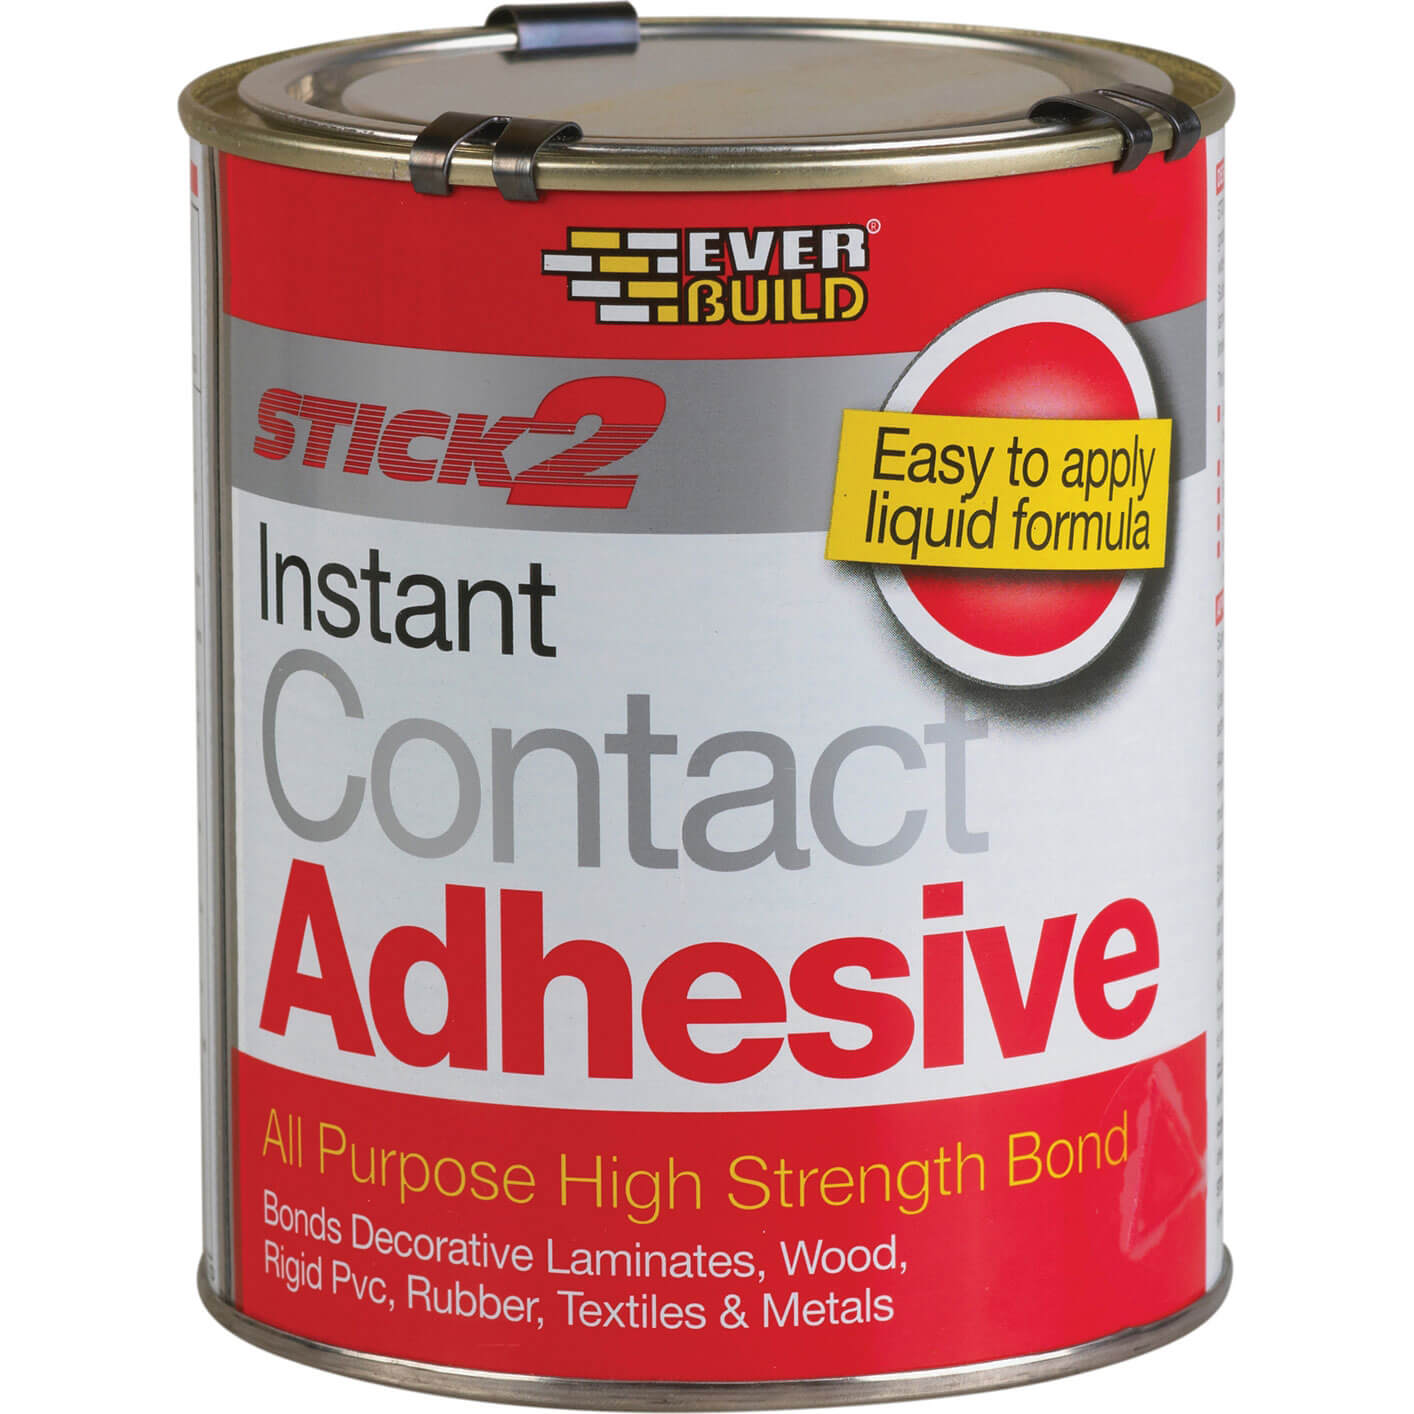 Image of Everbuild Stick 2 All Purpose Contact Adhesive 750ml